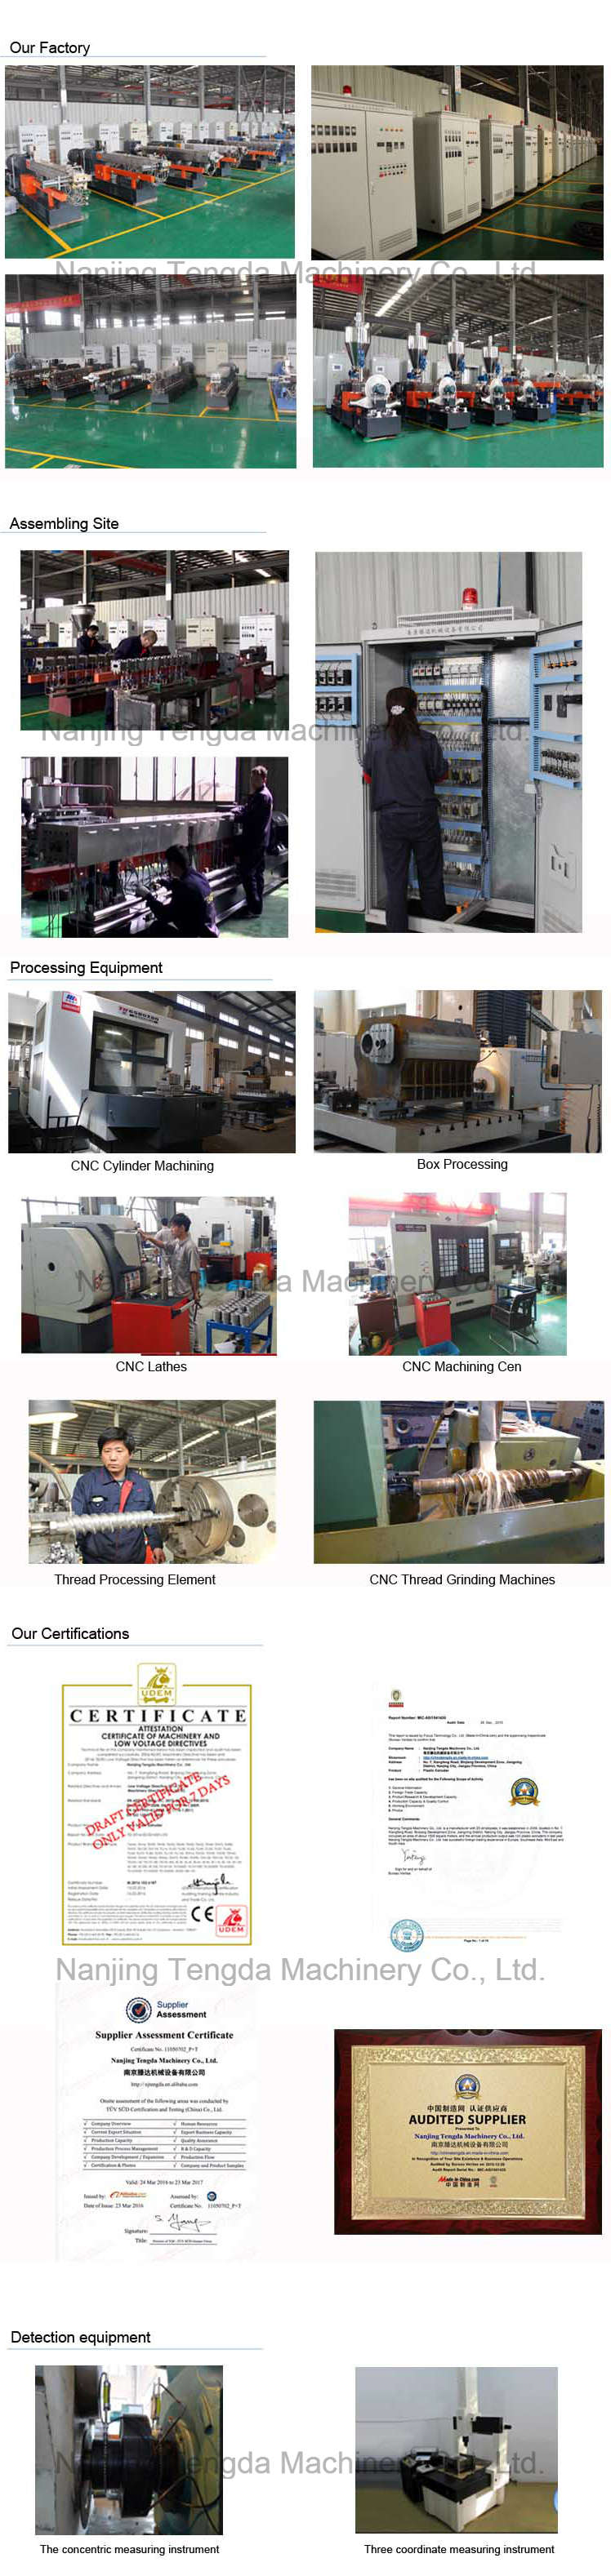 High Performance Twin Screw Extruder From Manufacturing